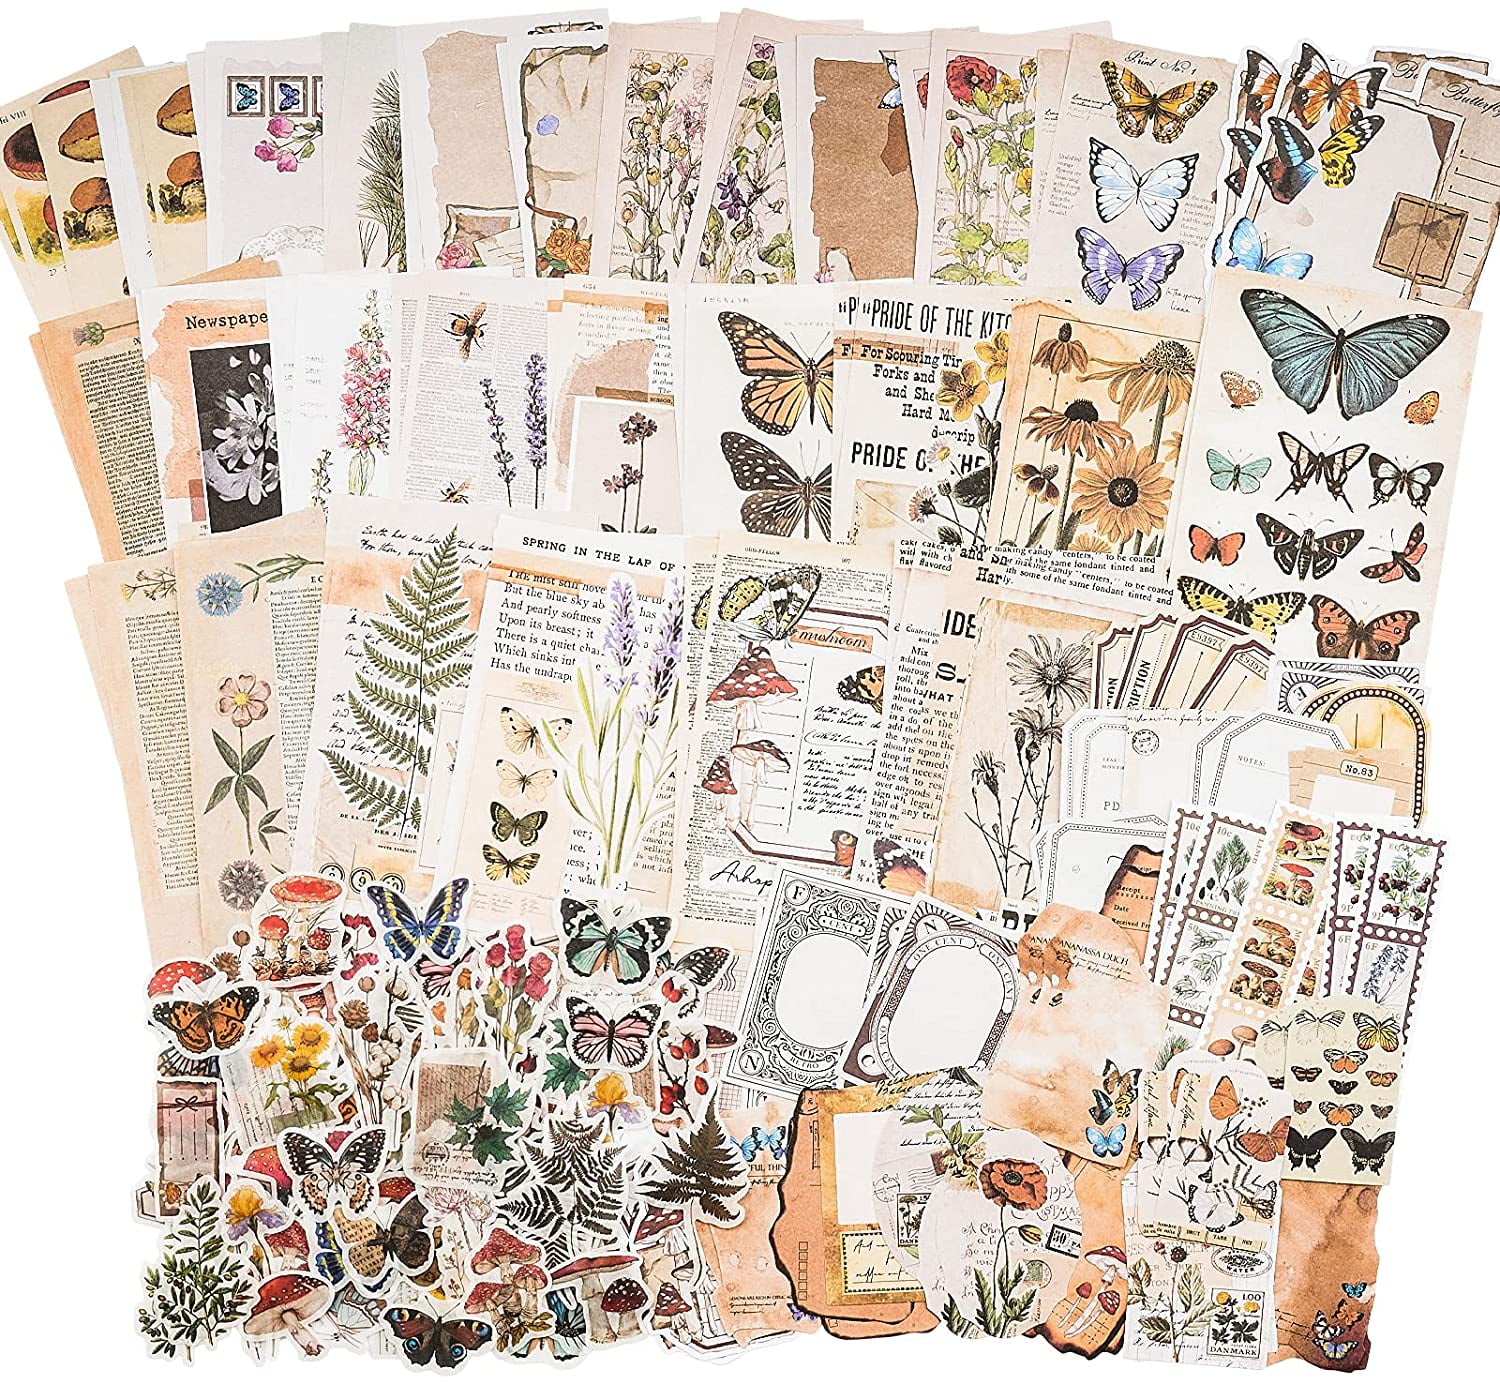  All in One Scrapbooking Supplies Kit - 331 Vintage Pieces incl.  Junk Journal - Journaling Set Incl. Stickers, Tags, Scrapbook Paper - The  Perfect Bundle for Your Amazing Craft Projects 